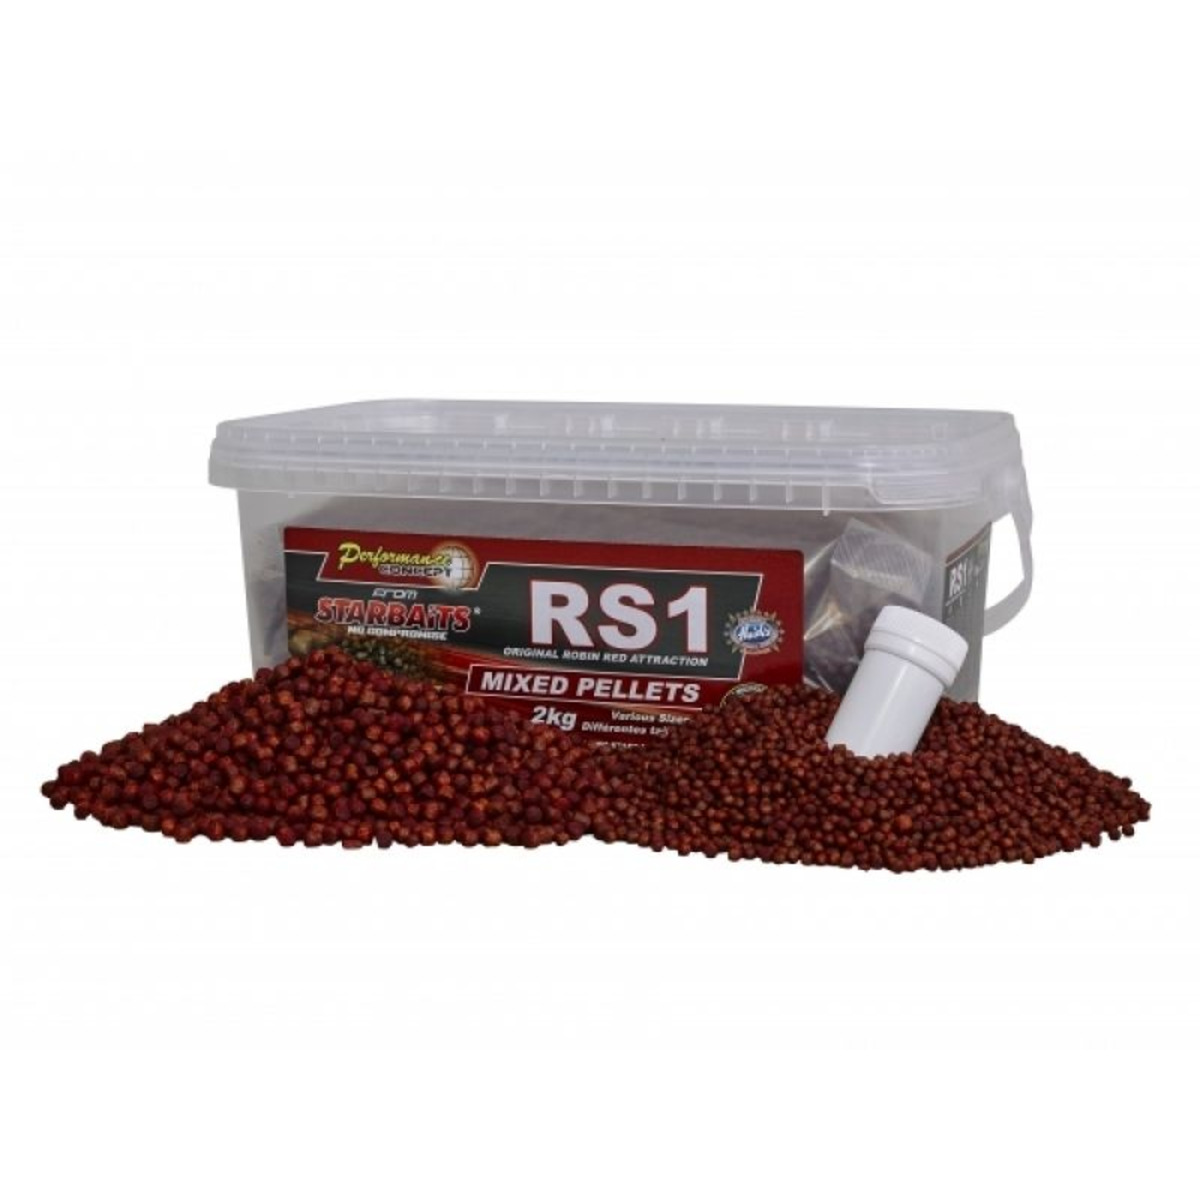 Starbaits Concept Pellets Rs1 - 700 g